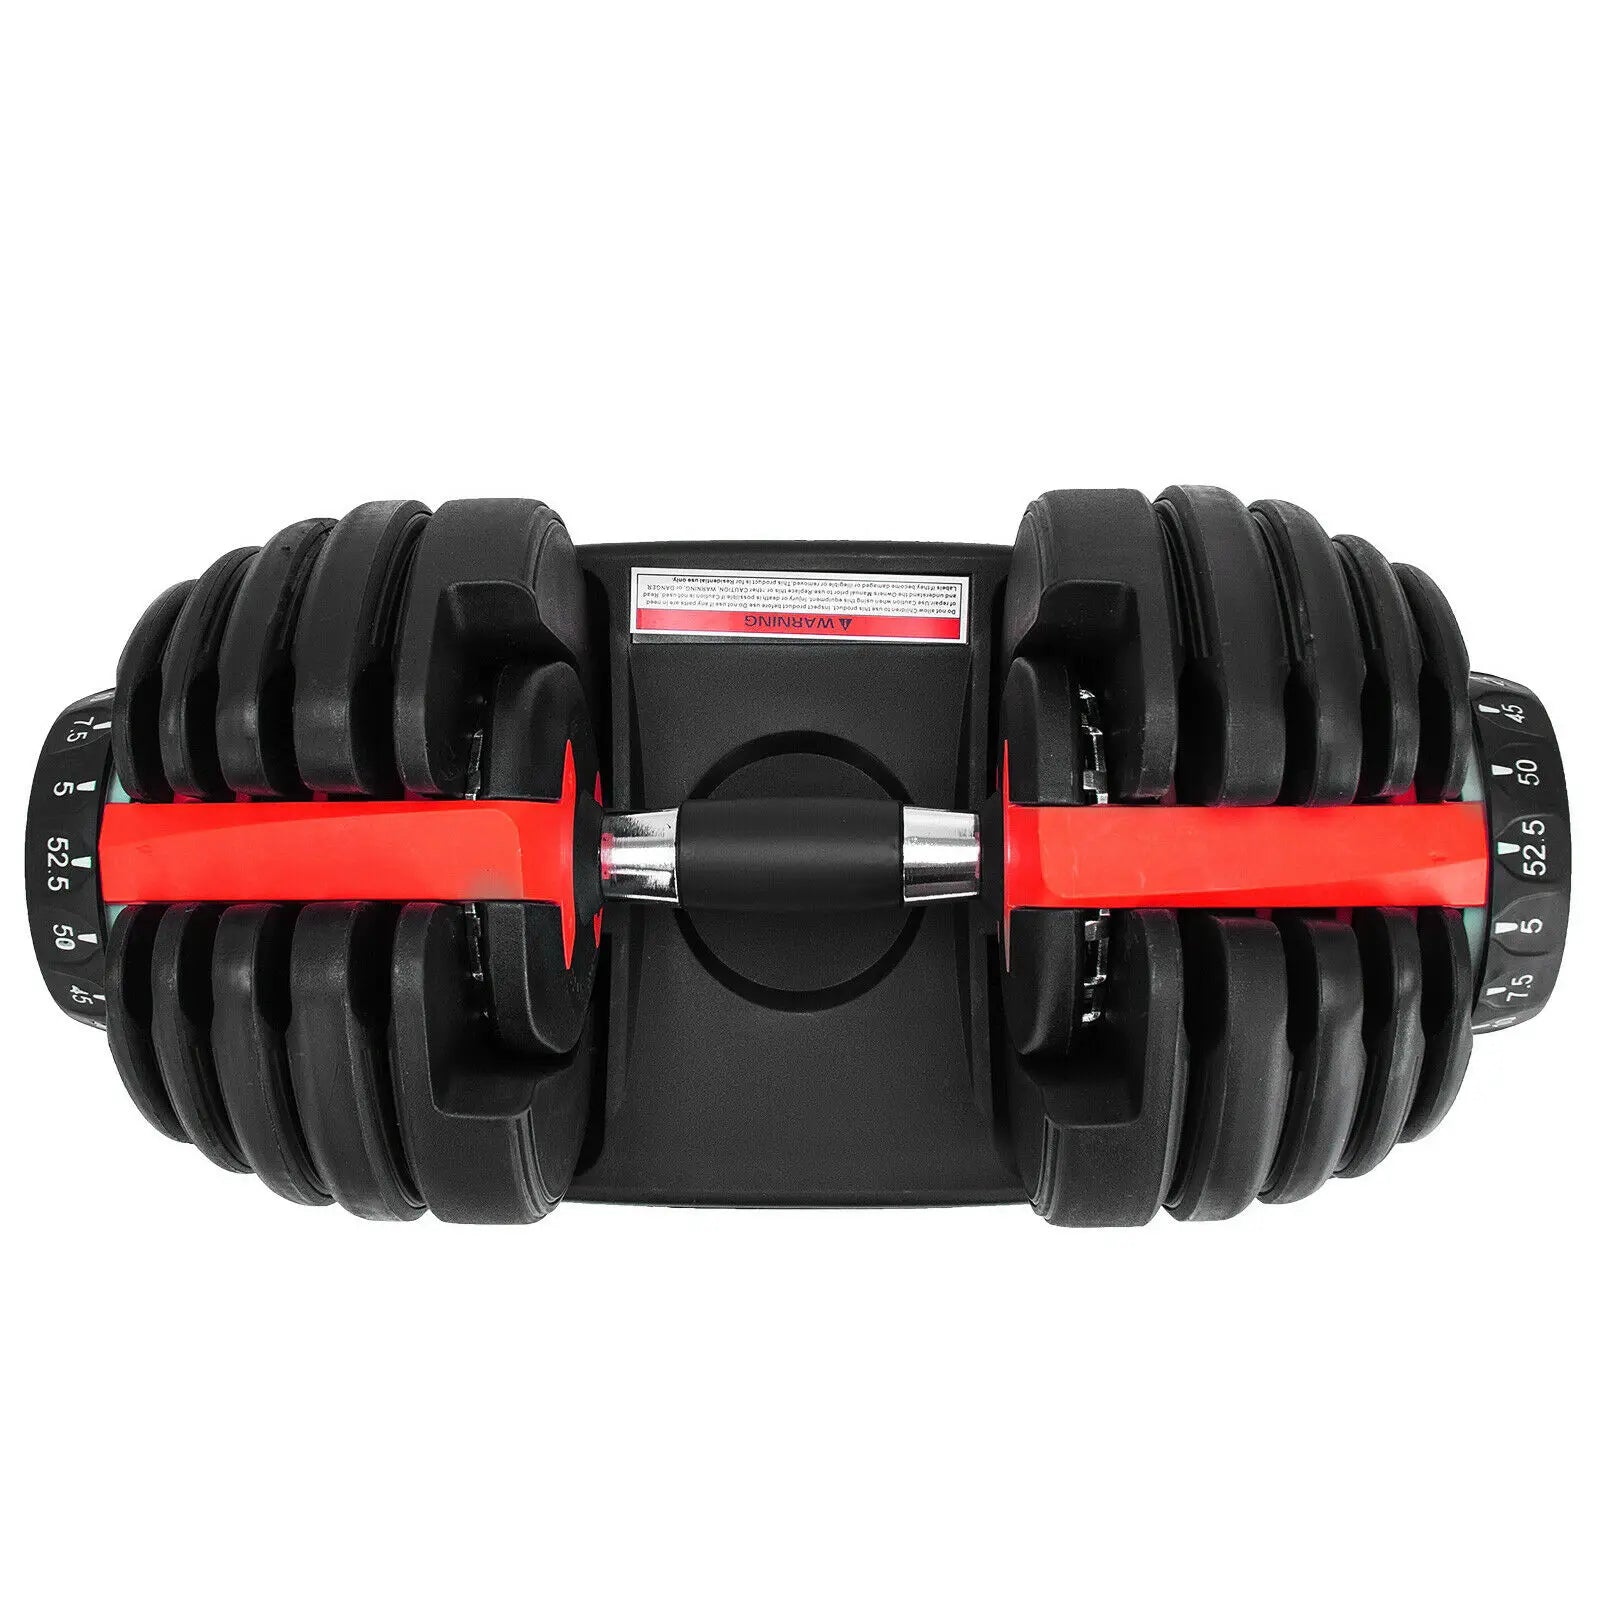 Adjustable Dumbbell Fitness Workouts dumbbells 24KG tone your strength and build your muscles 5-52.5lbs